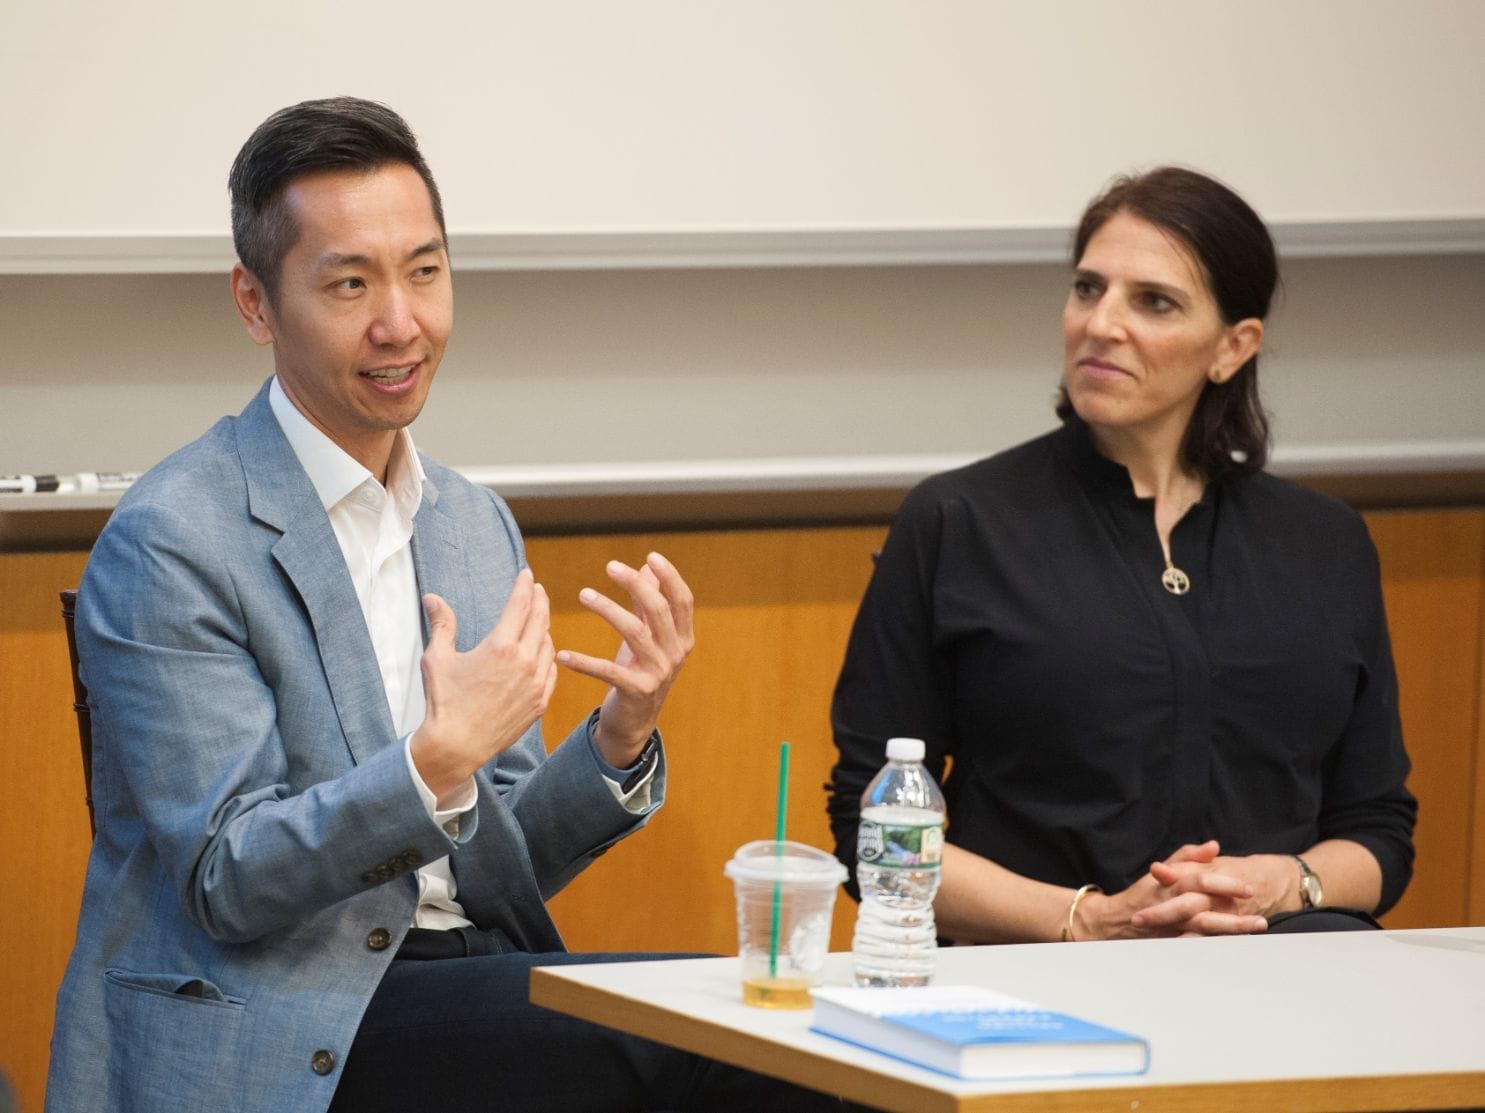 Alumni Robert Chen and Rachel Pacheco speak at the front of a classroom about their new books.